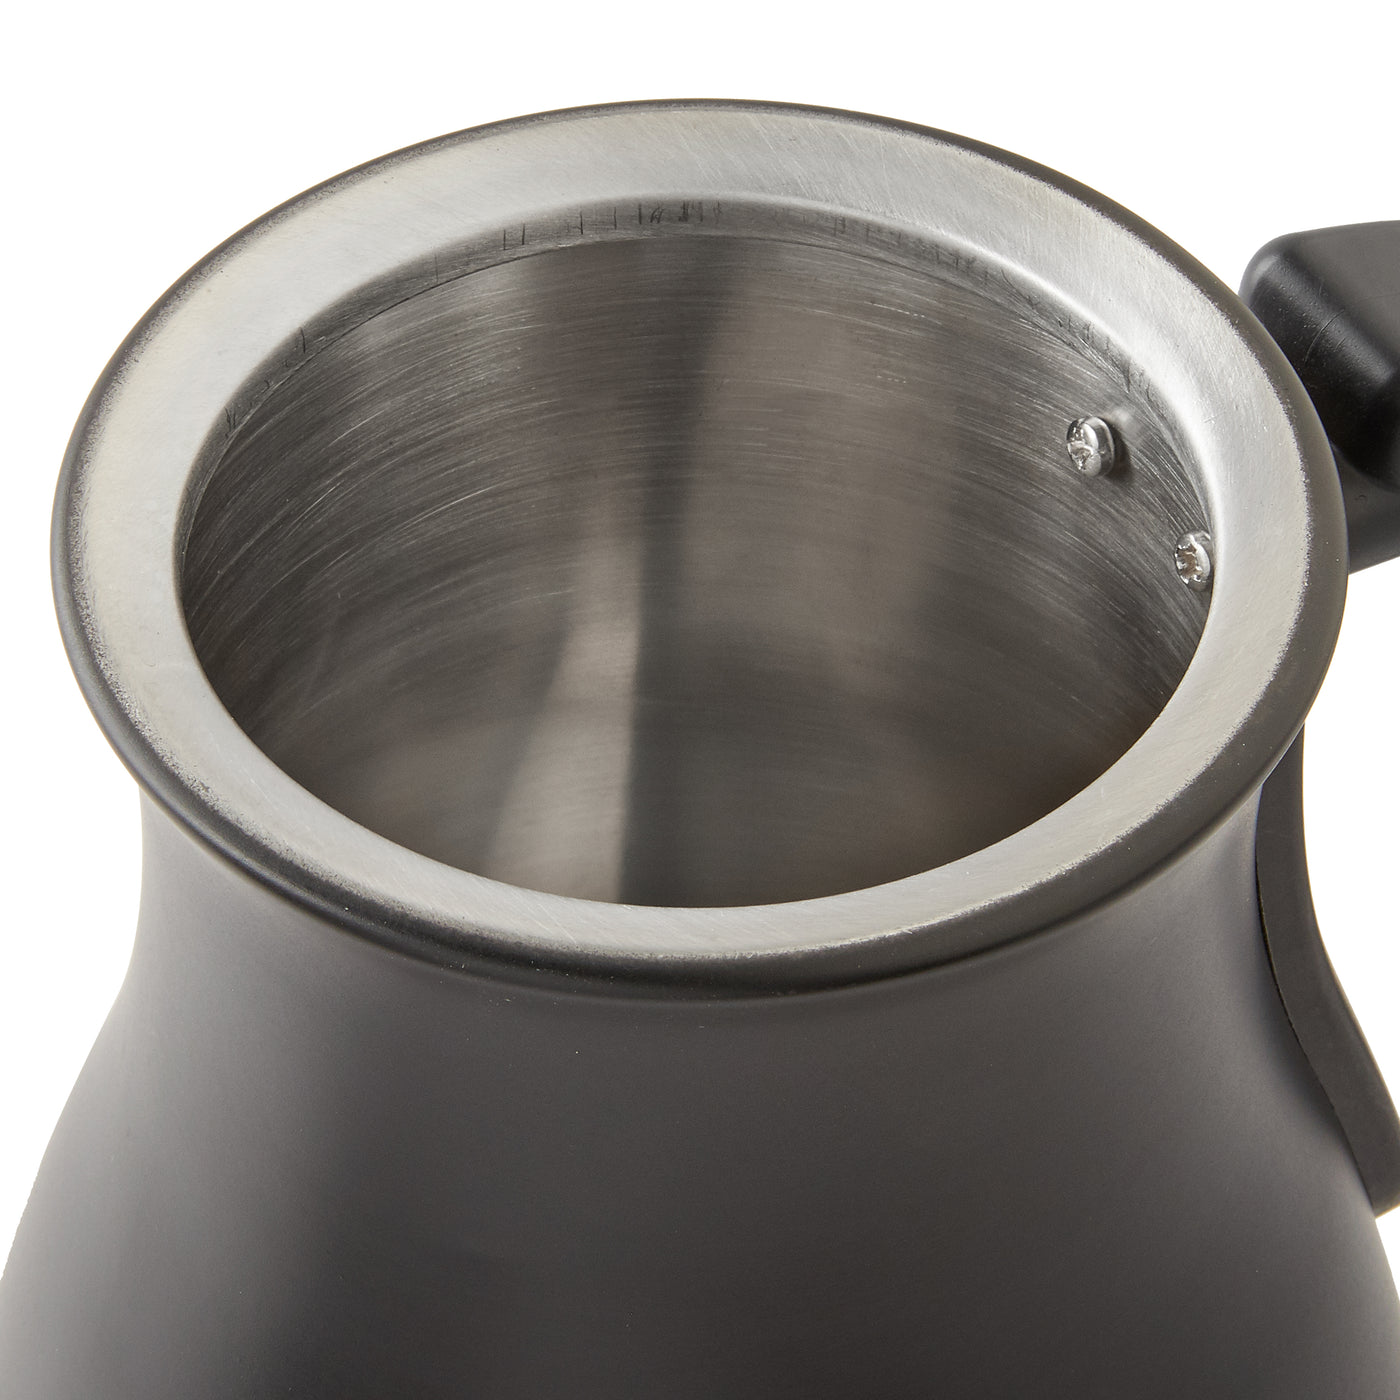 Boil water to the exact degree with the 1200 watt Chef'sChoice